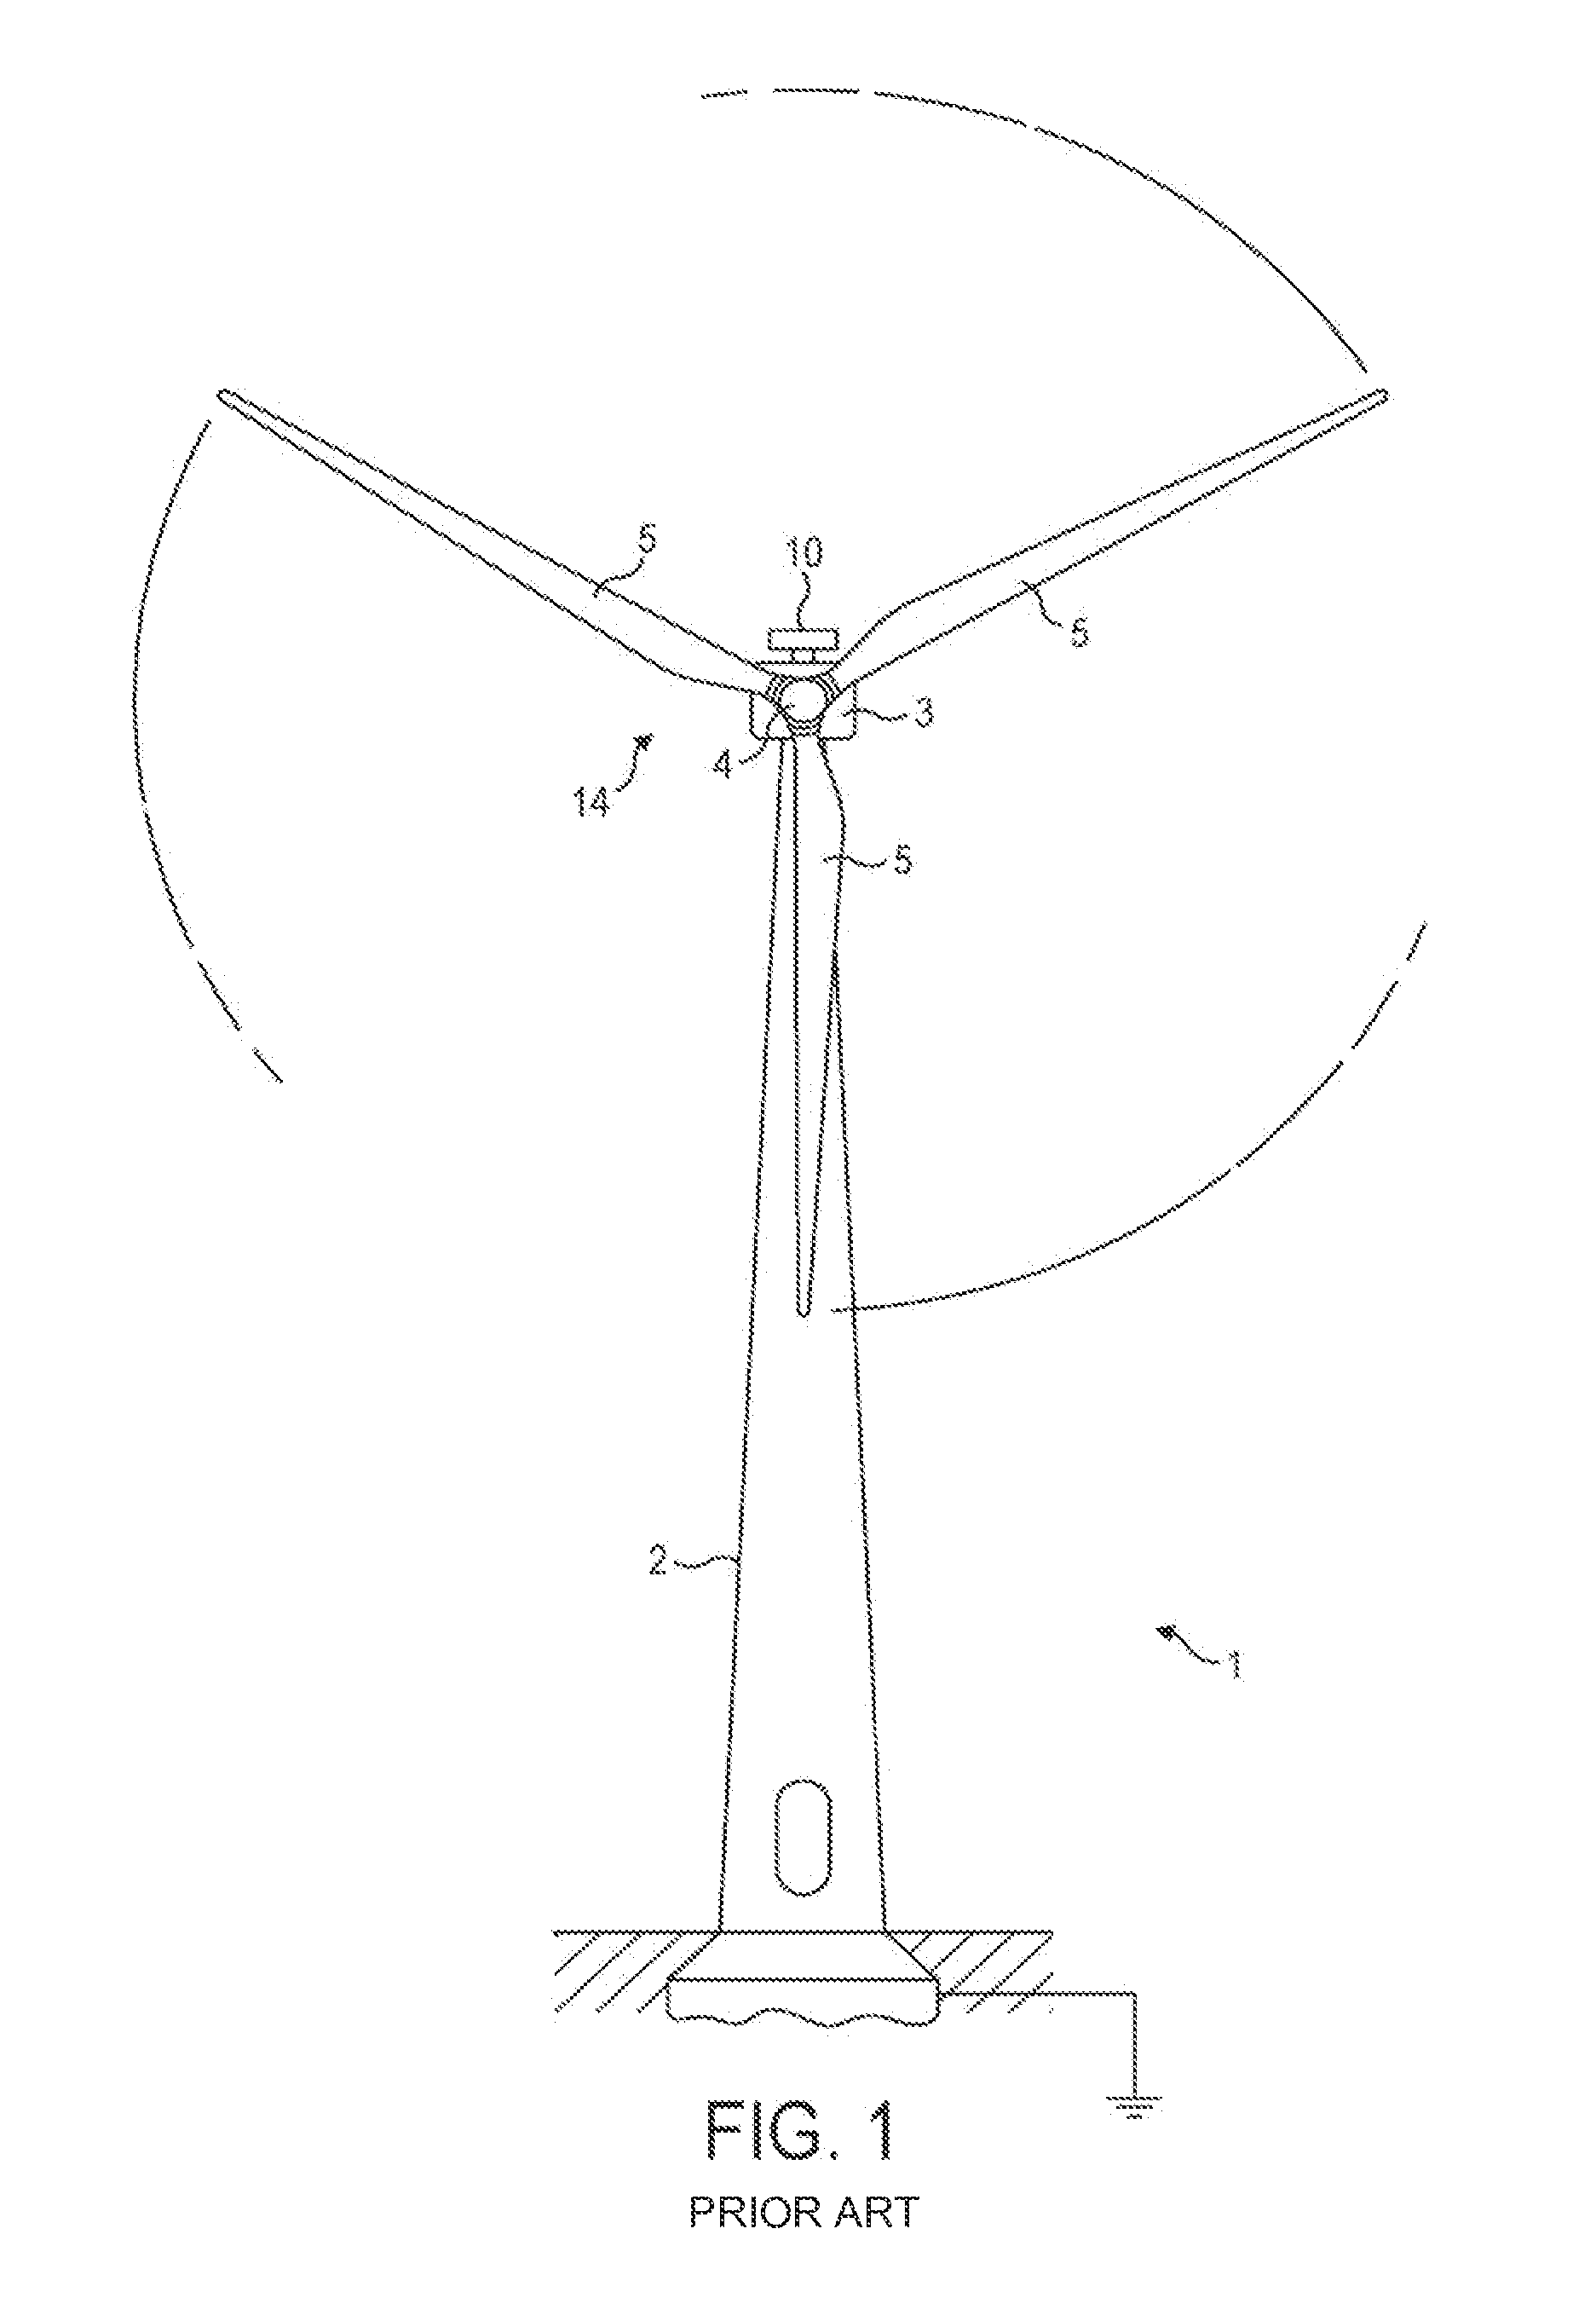 System and method for controlling power output from a wind turbine or wind power plant